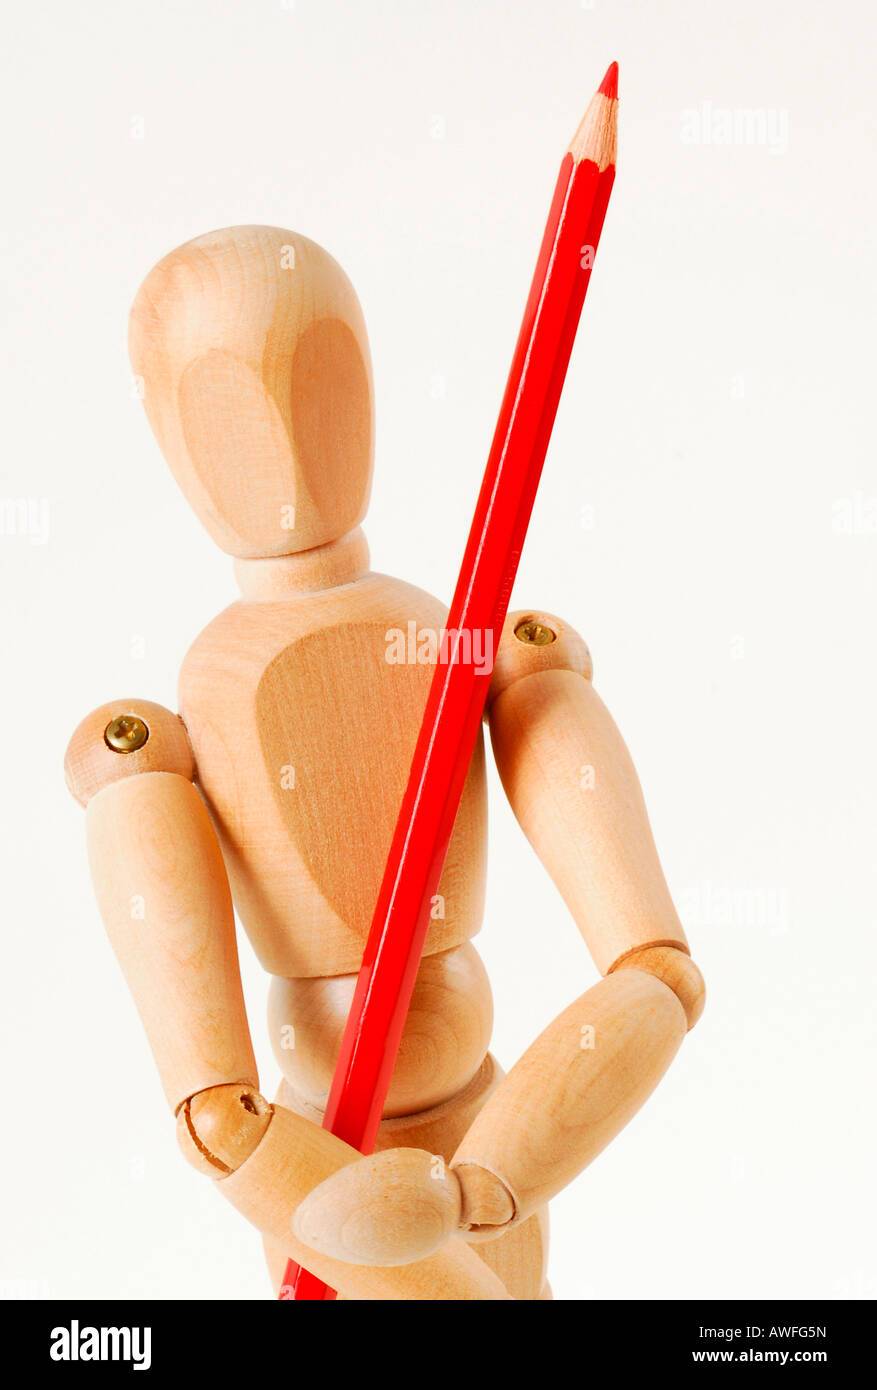 Jointed doll with red pencil Stock Photo